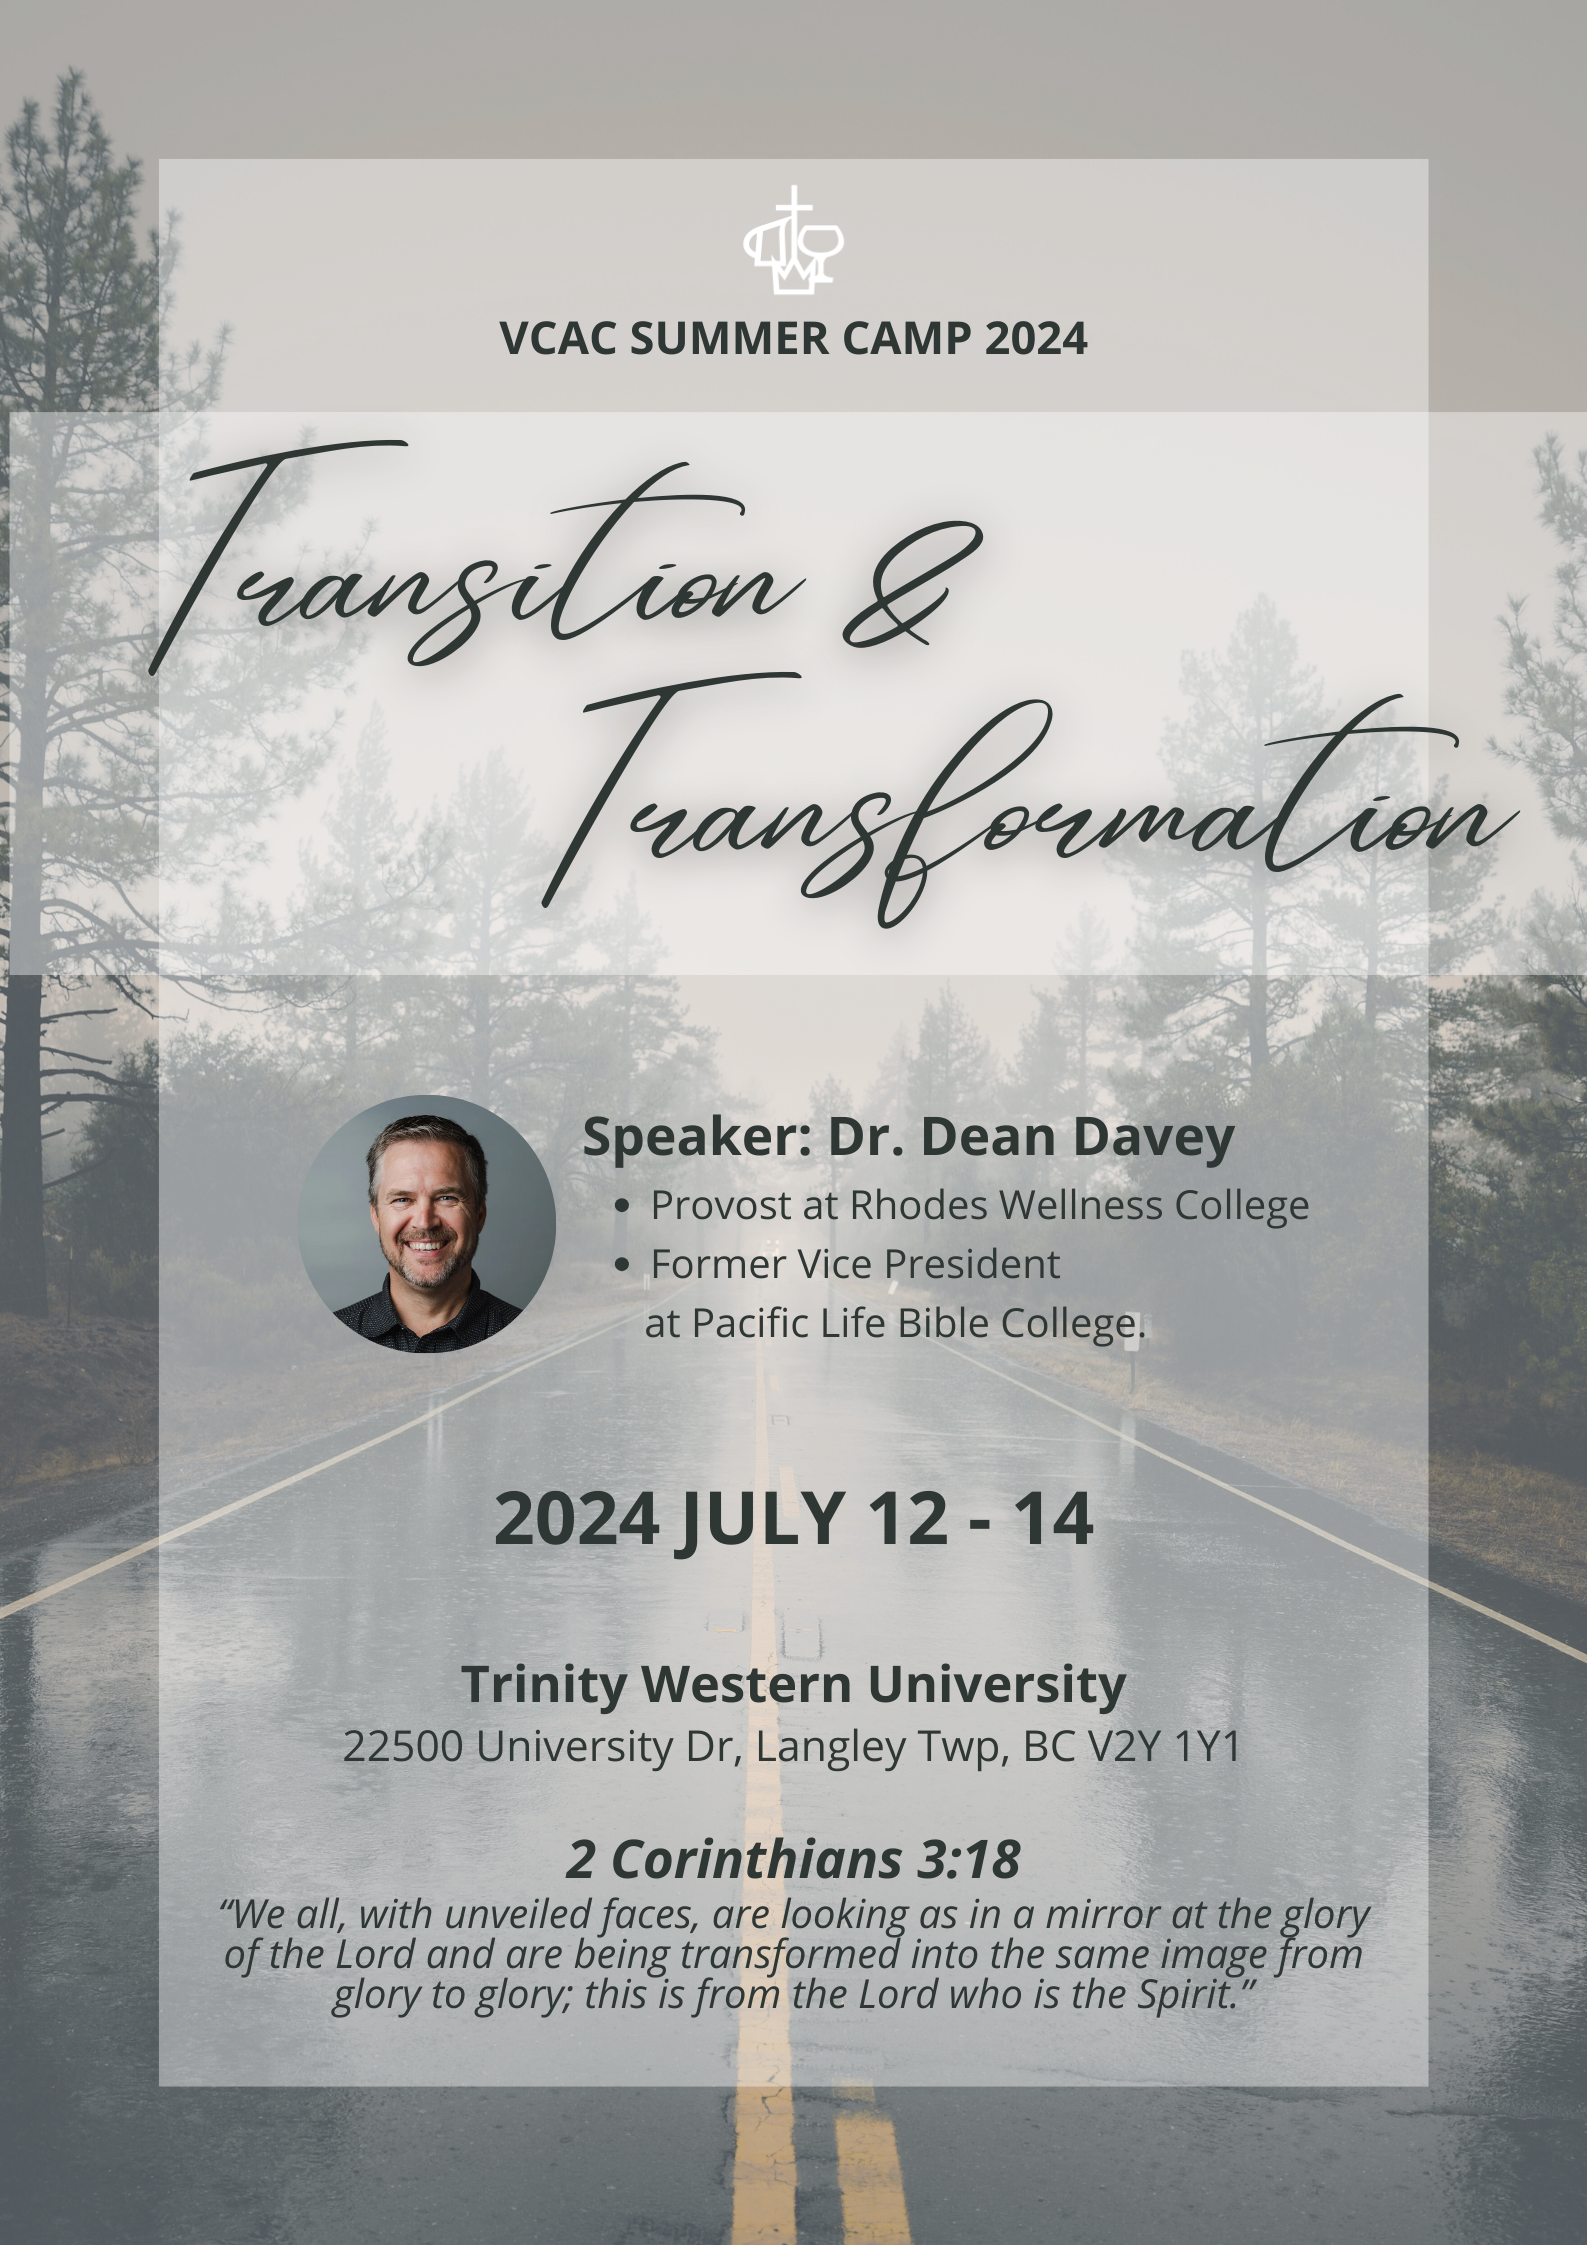 VCAC SUMMER CAMP 2024-TRANSITION & TRANSFORMATION